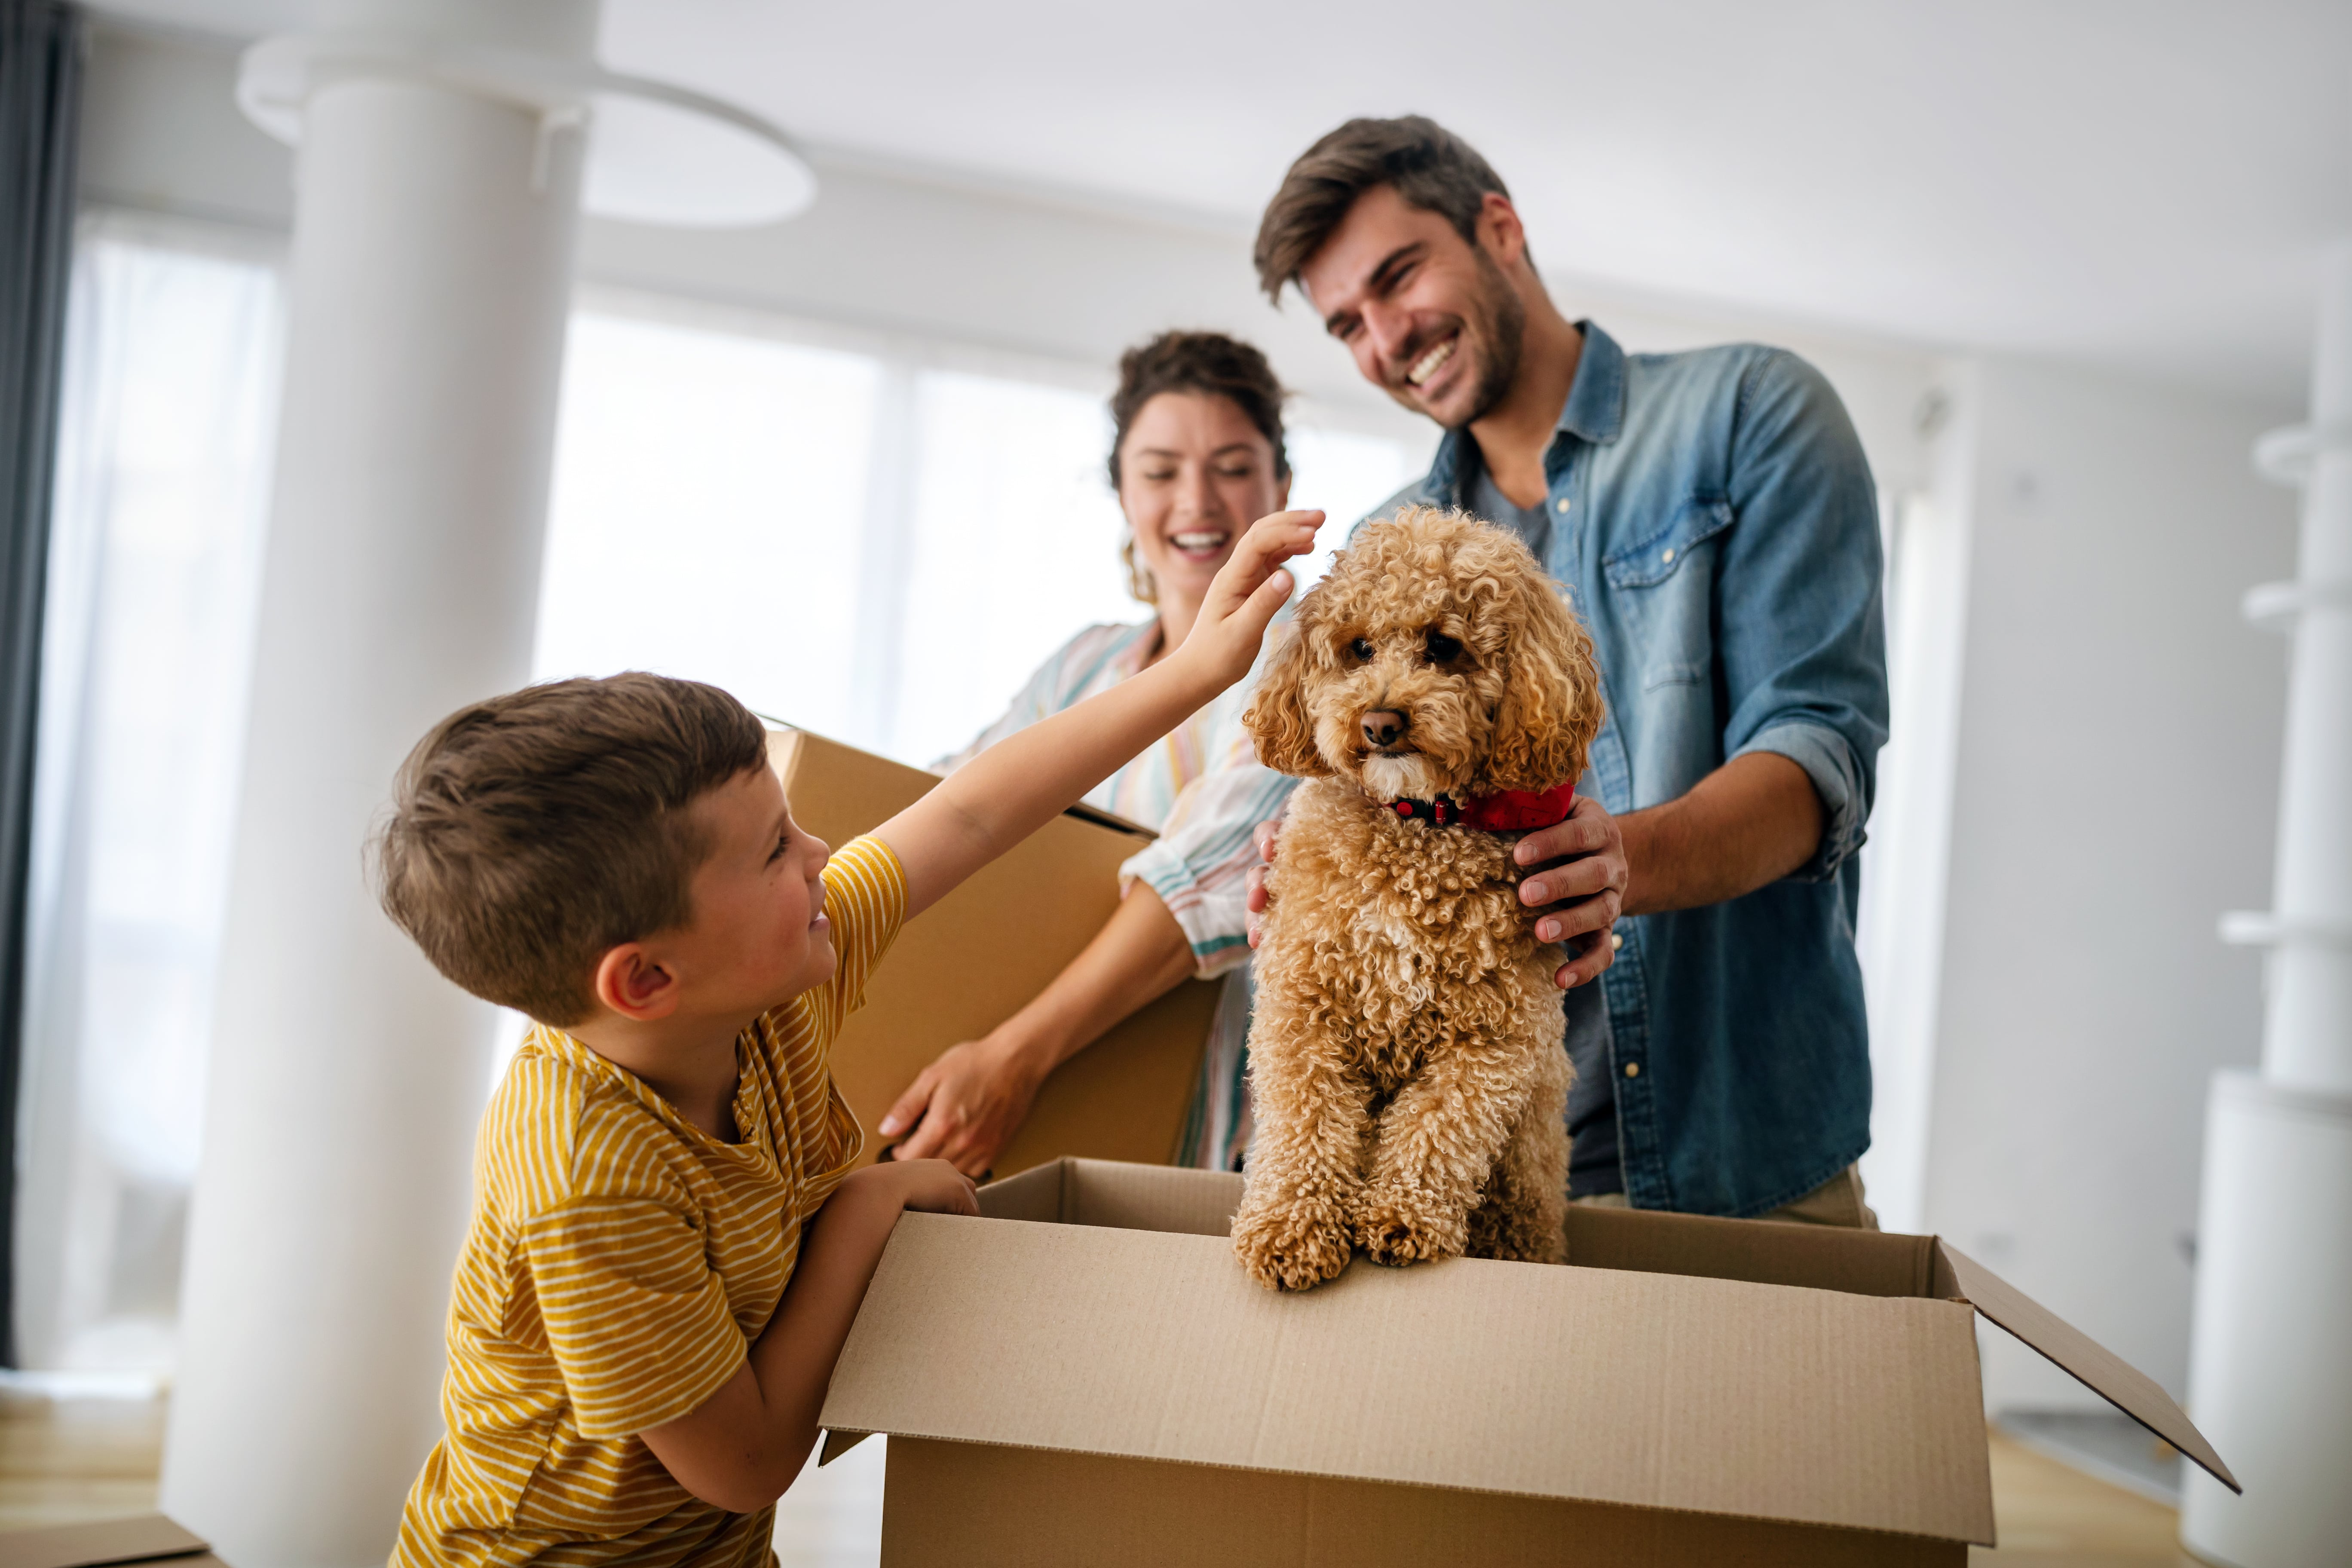 Image is the interior of a house. A dog sits in a cardboard box and is being patted by a young boy and man. A woman looks on smiling as she carries a closed cardboard box..